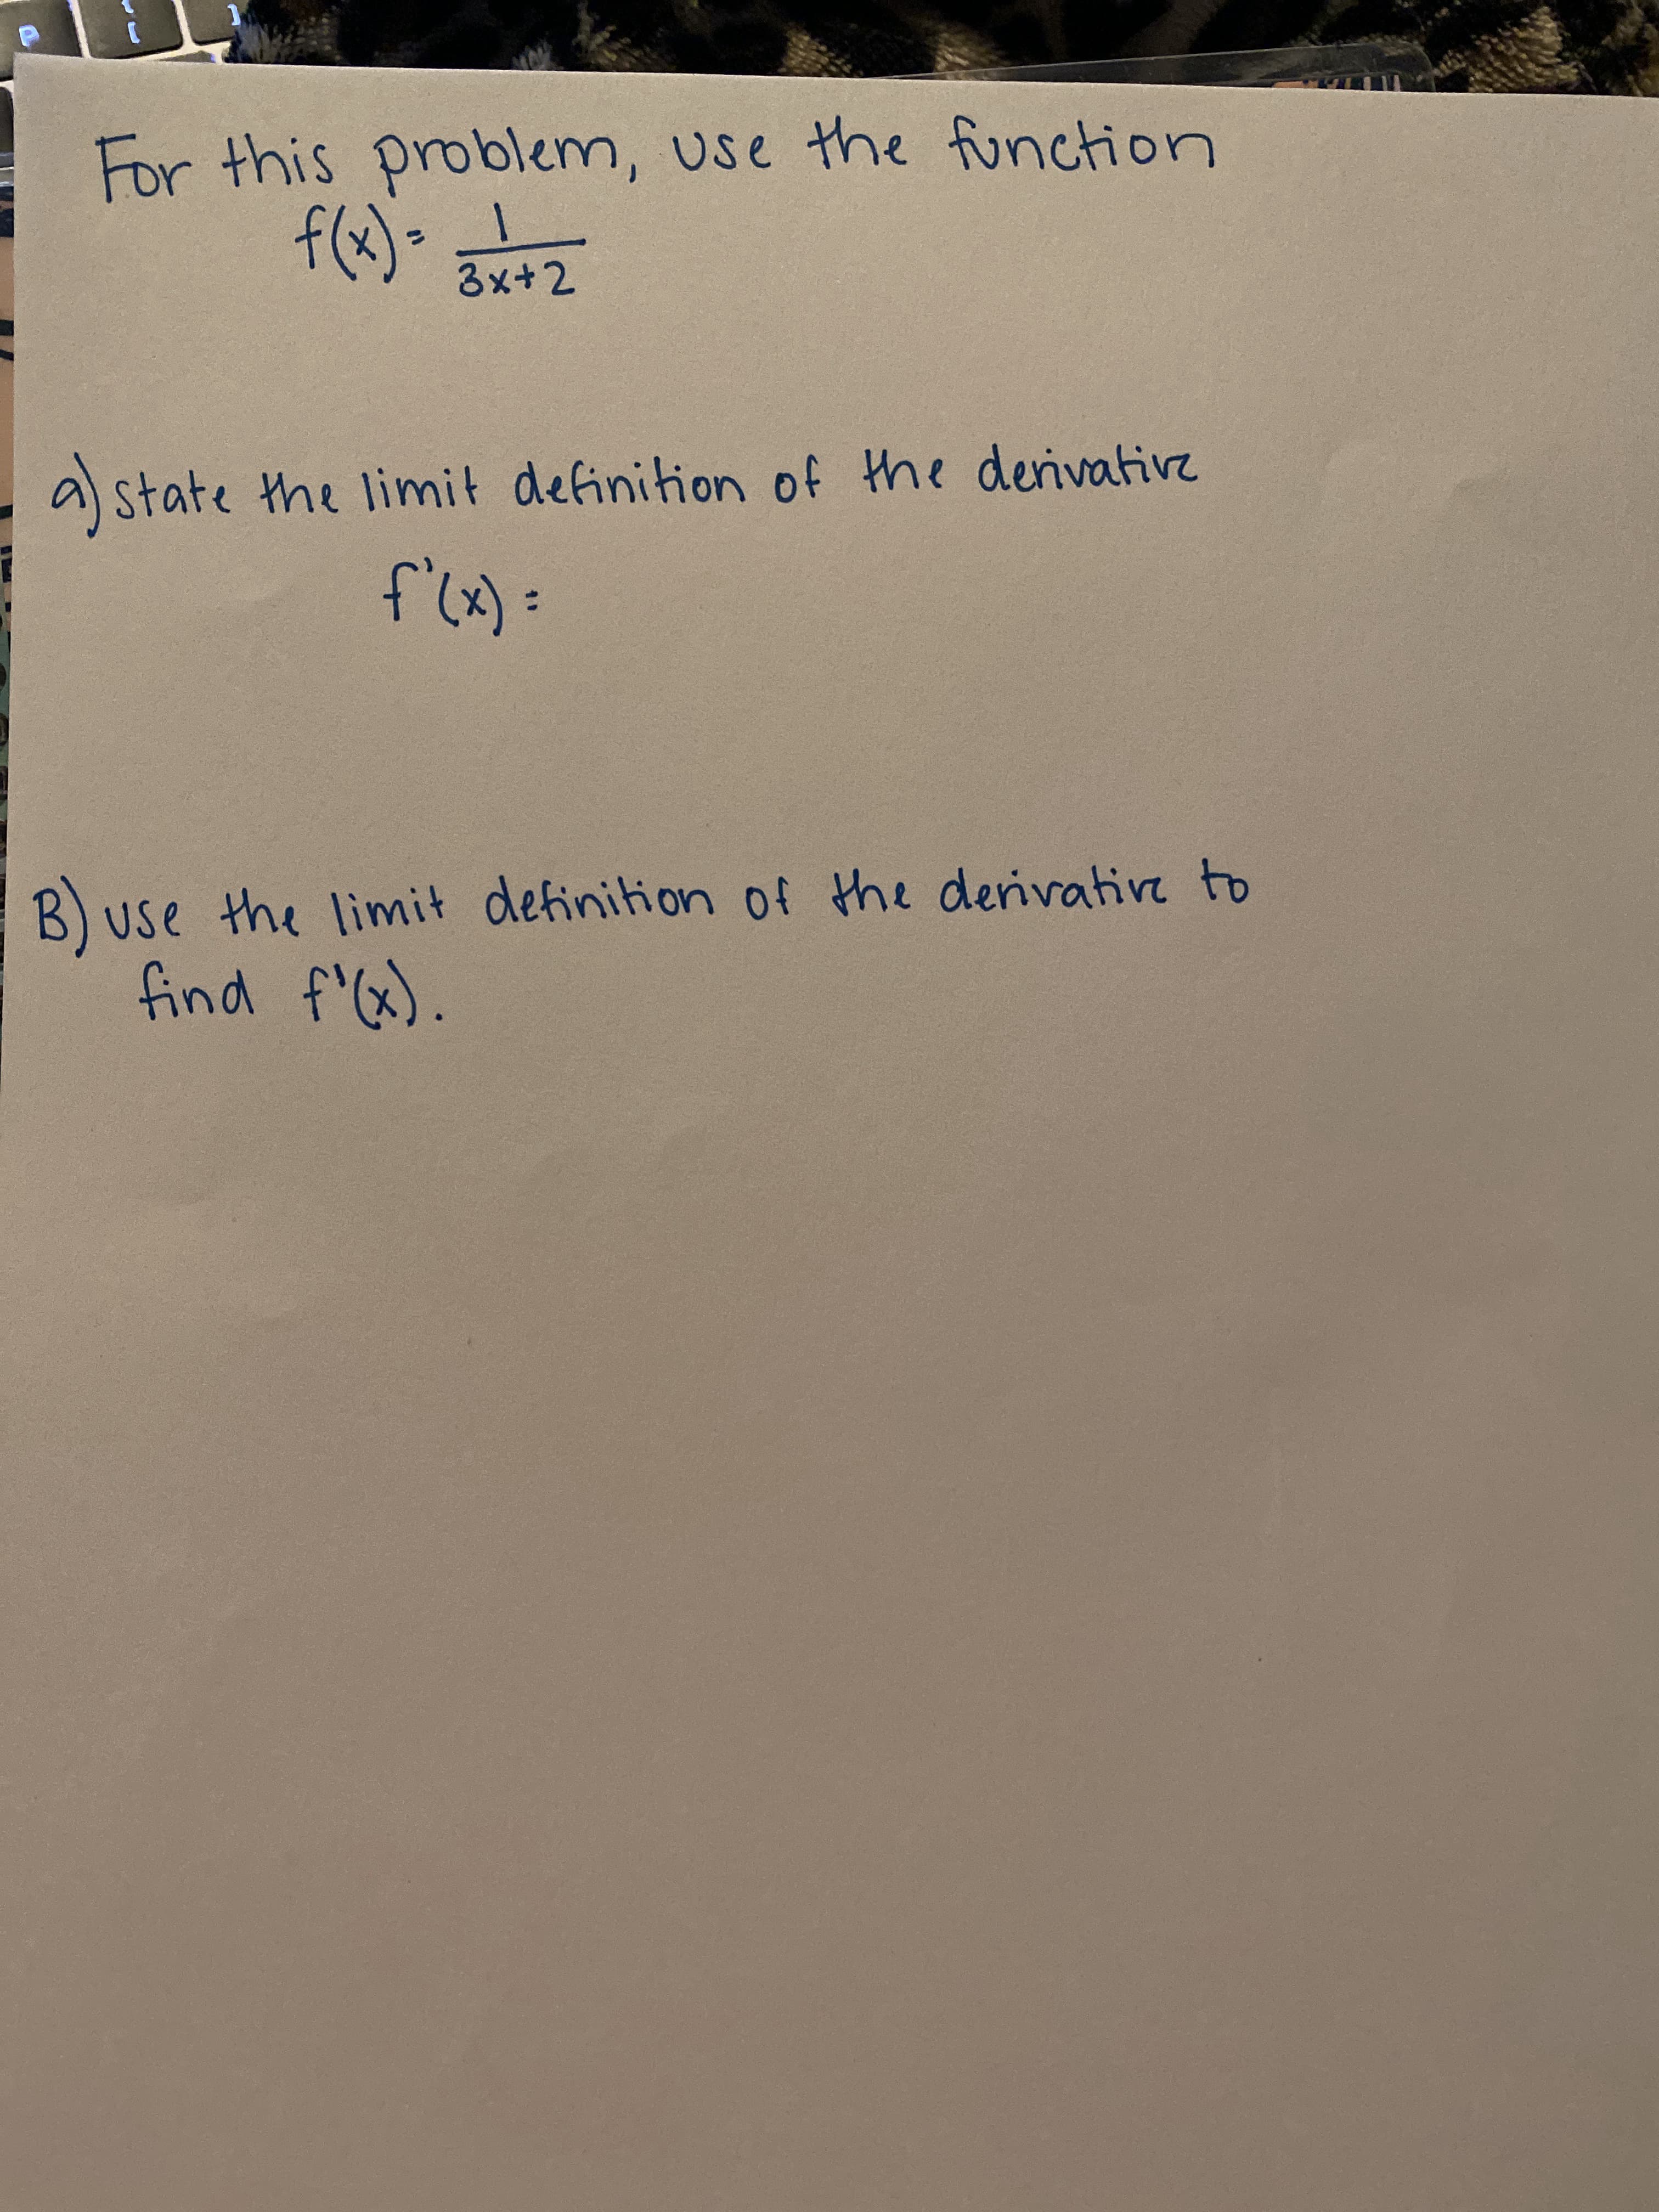 state the limit definition of the derivative
